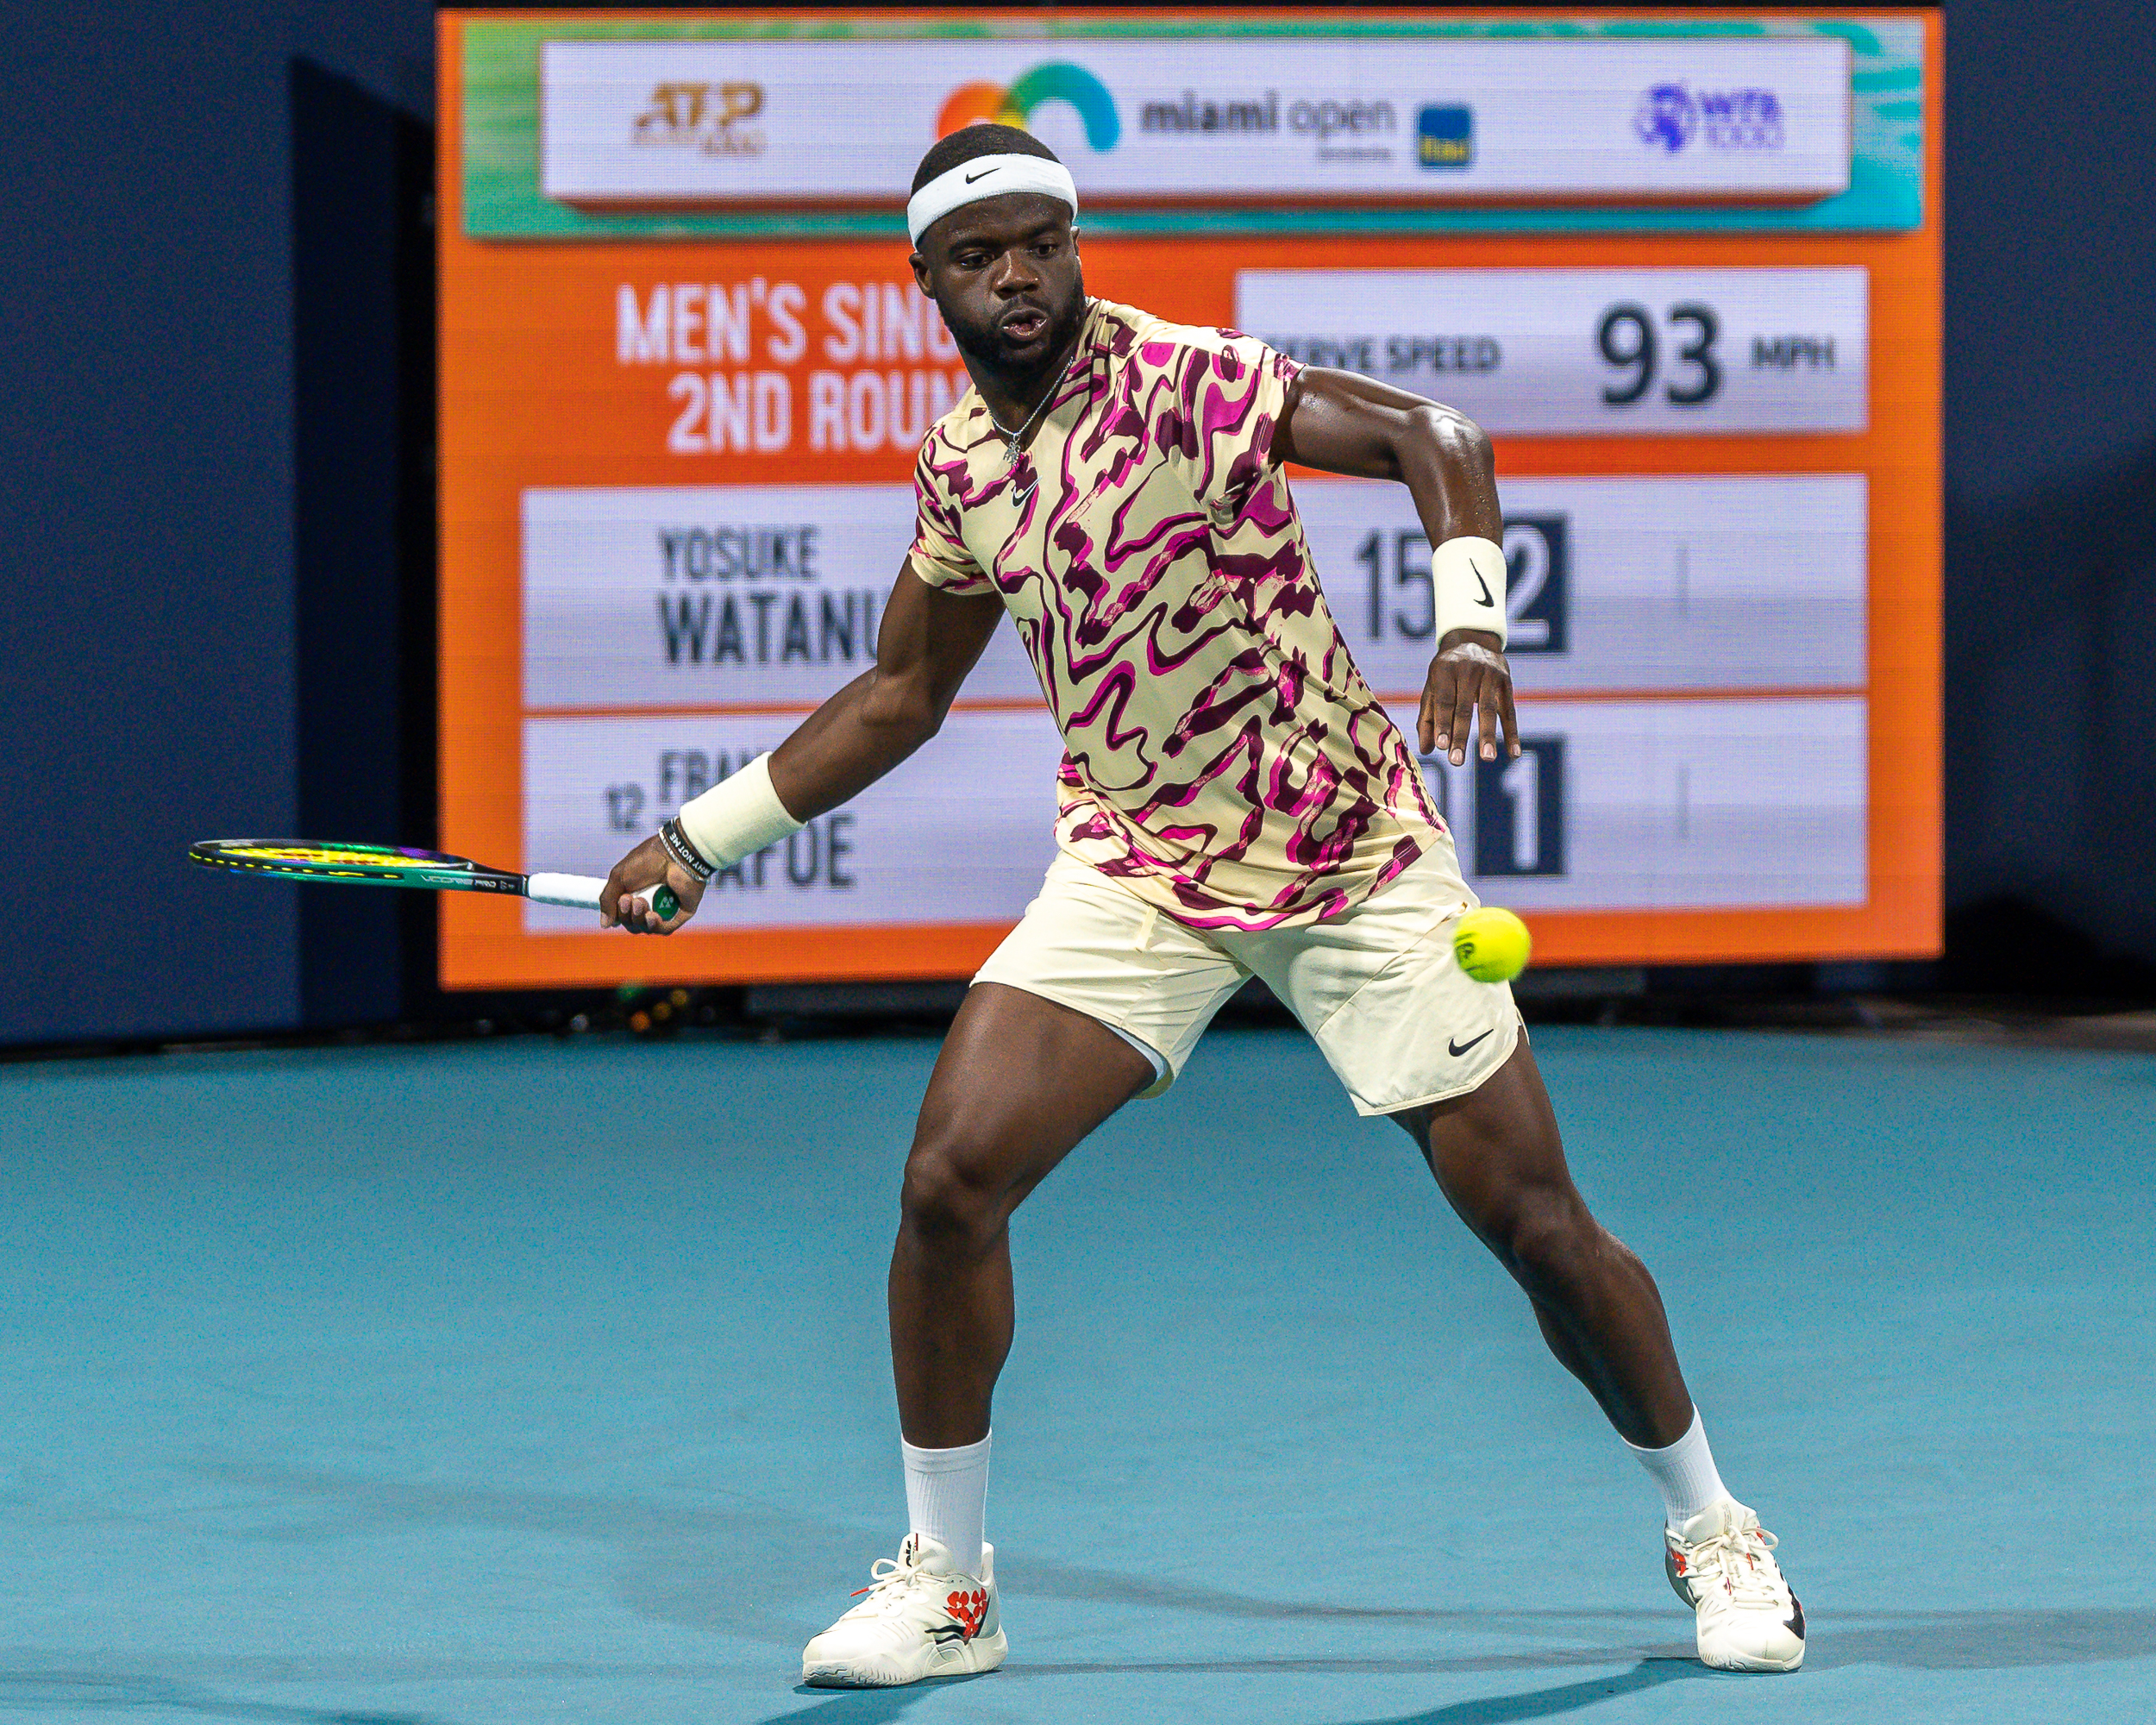 Frances Tiafoe ready for a forehand during his match against Yosuke Watanuke at the 2023 Miami Open.